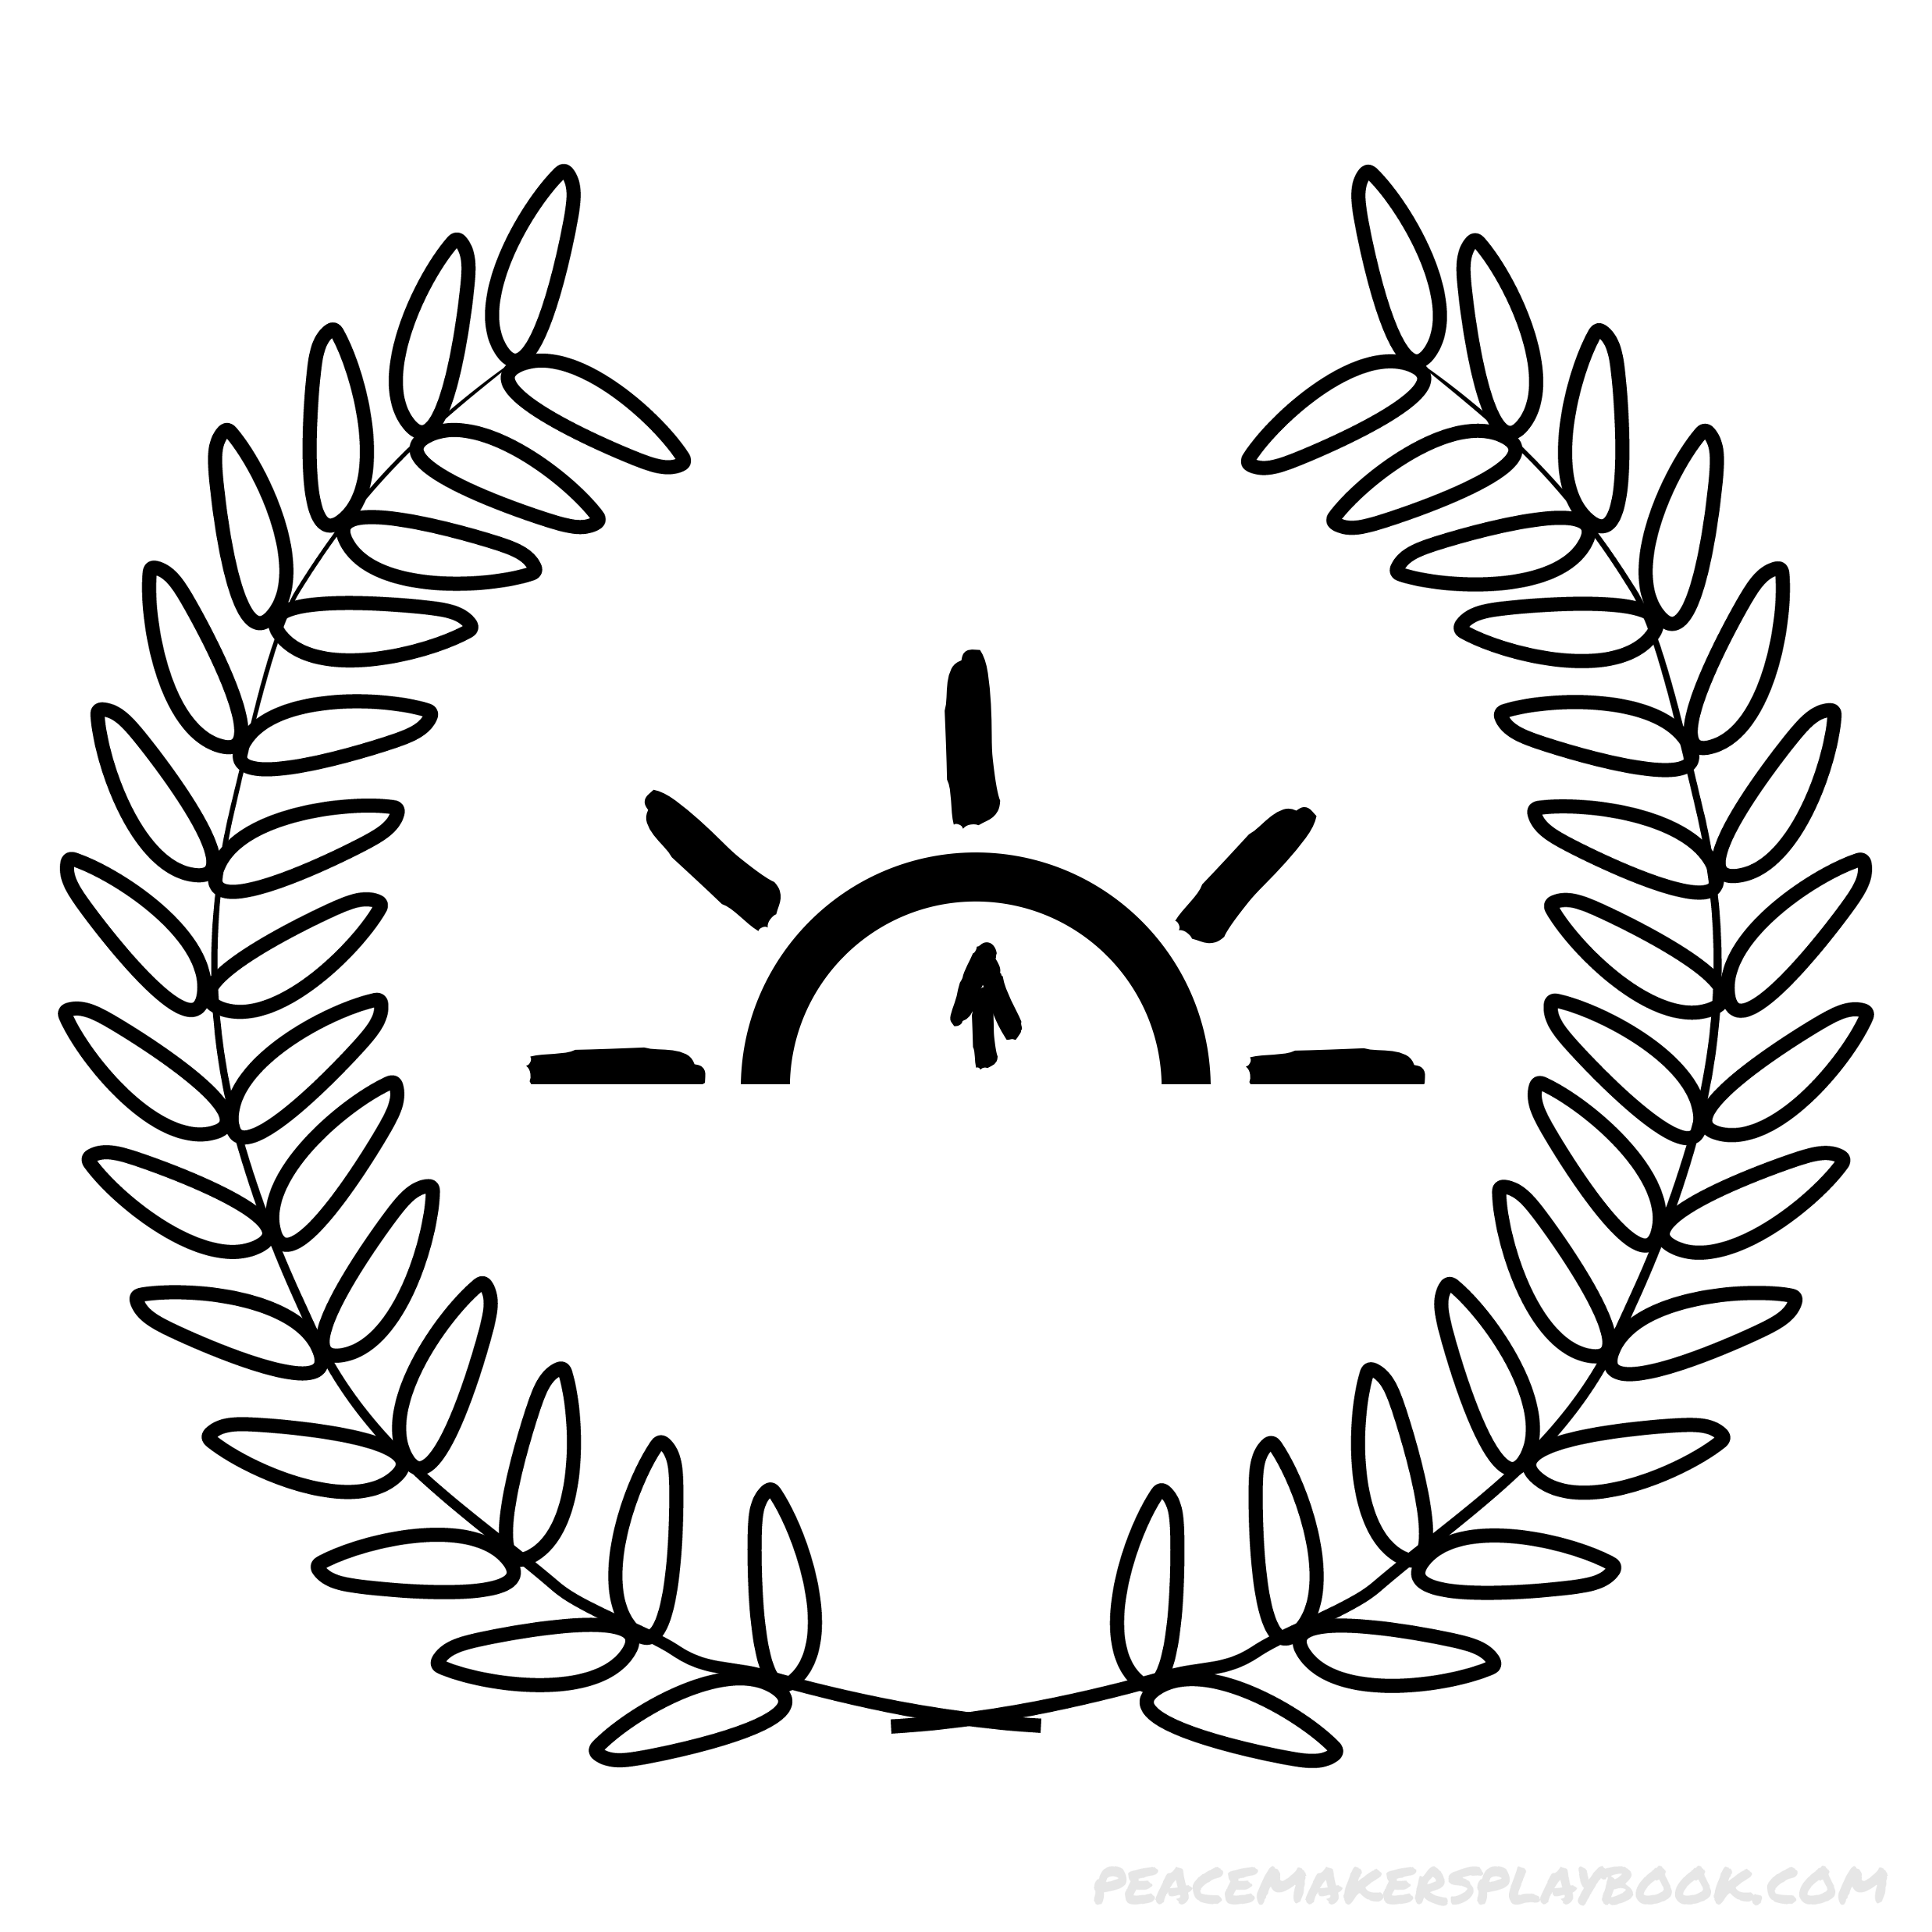 A rising sun representing optimism, surrounded by olive branches